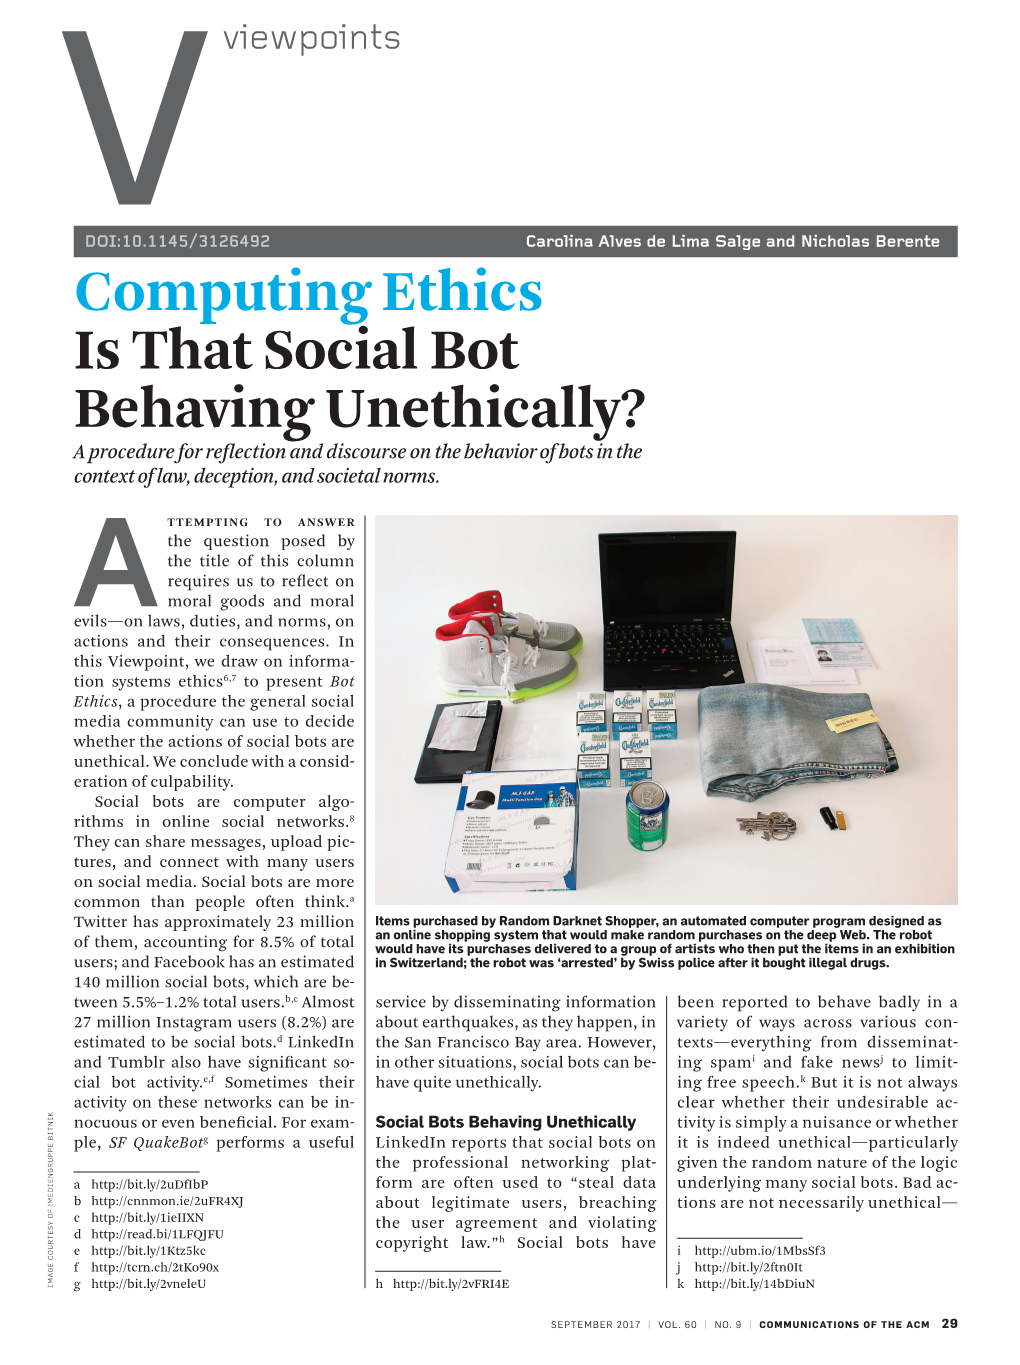 Computing Ethics Is That Social Bot Behaving Unethically?